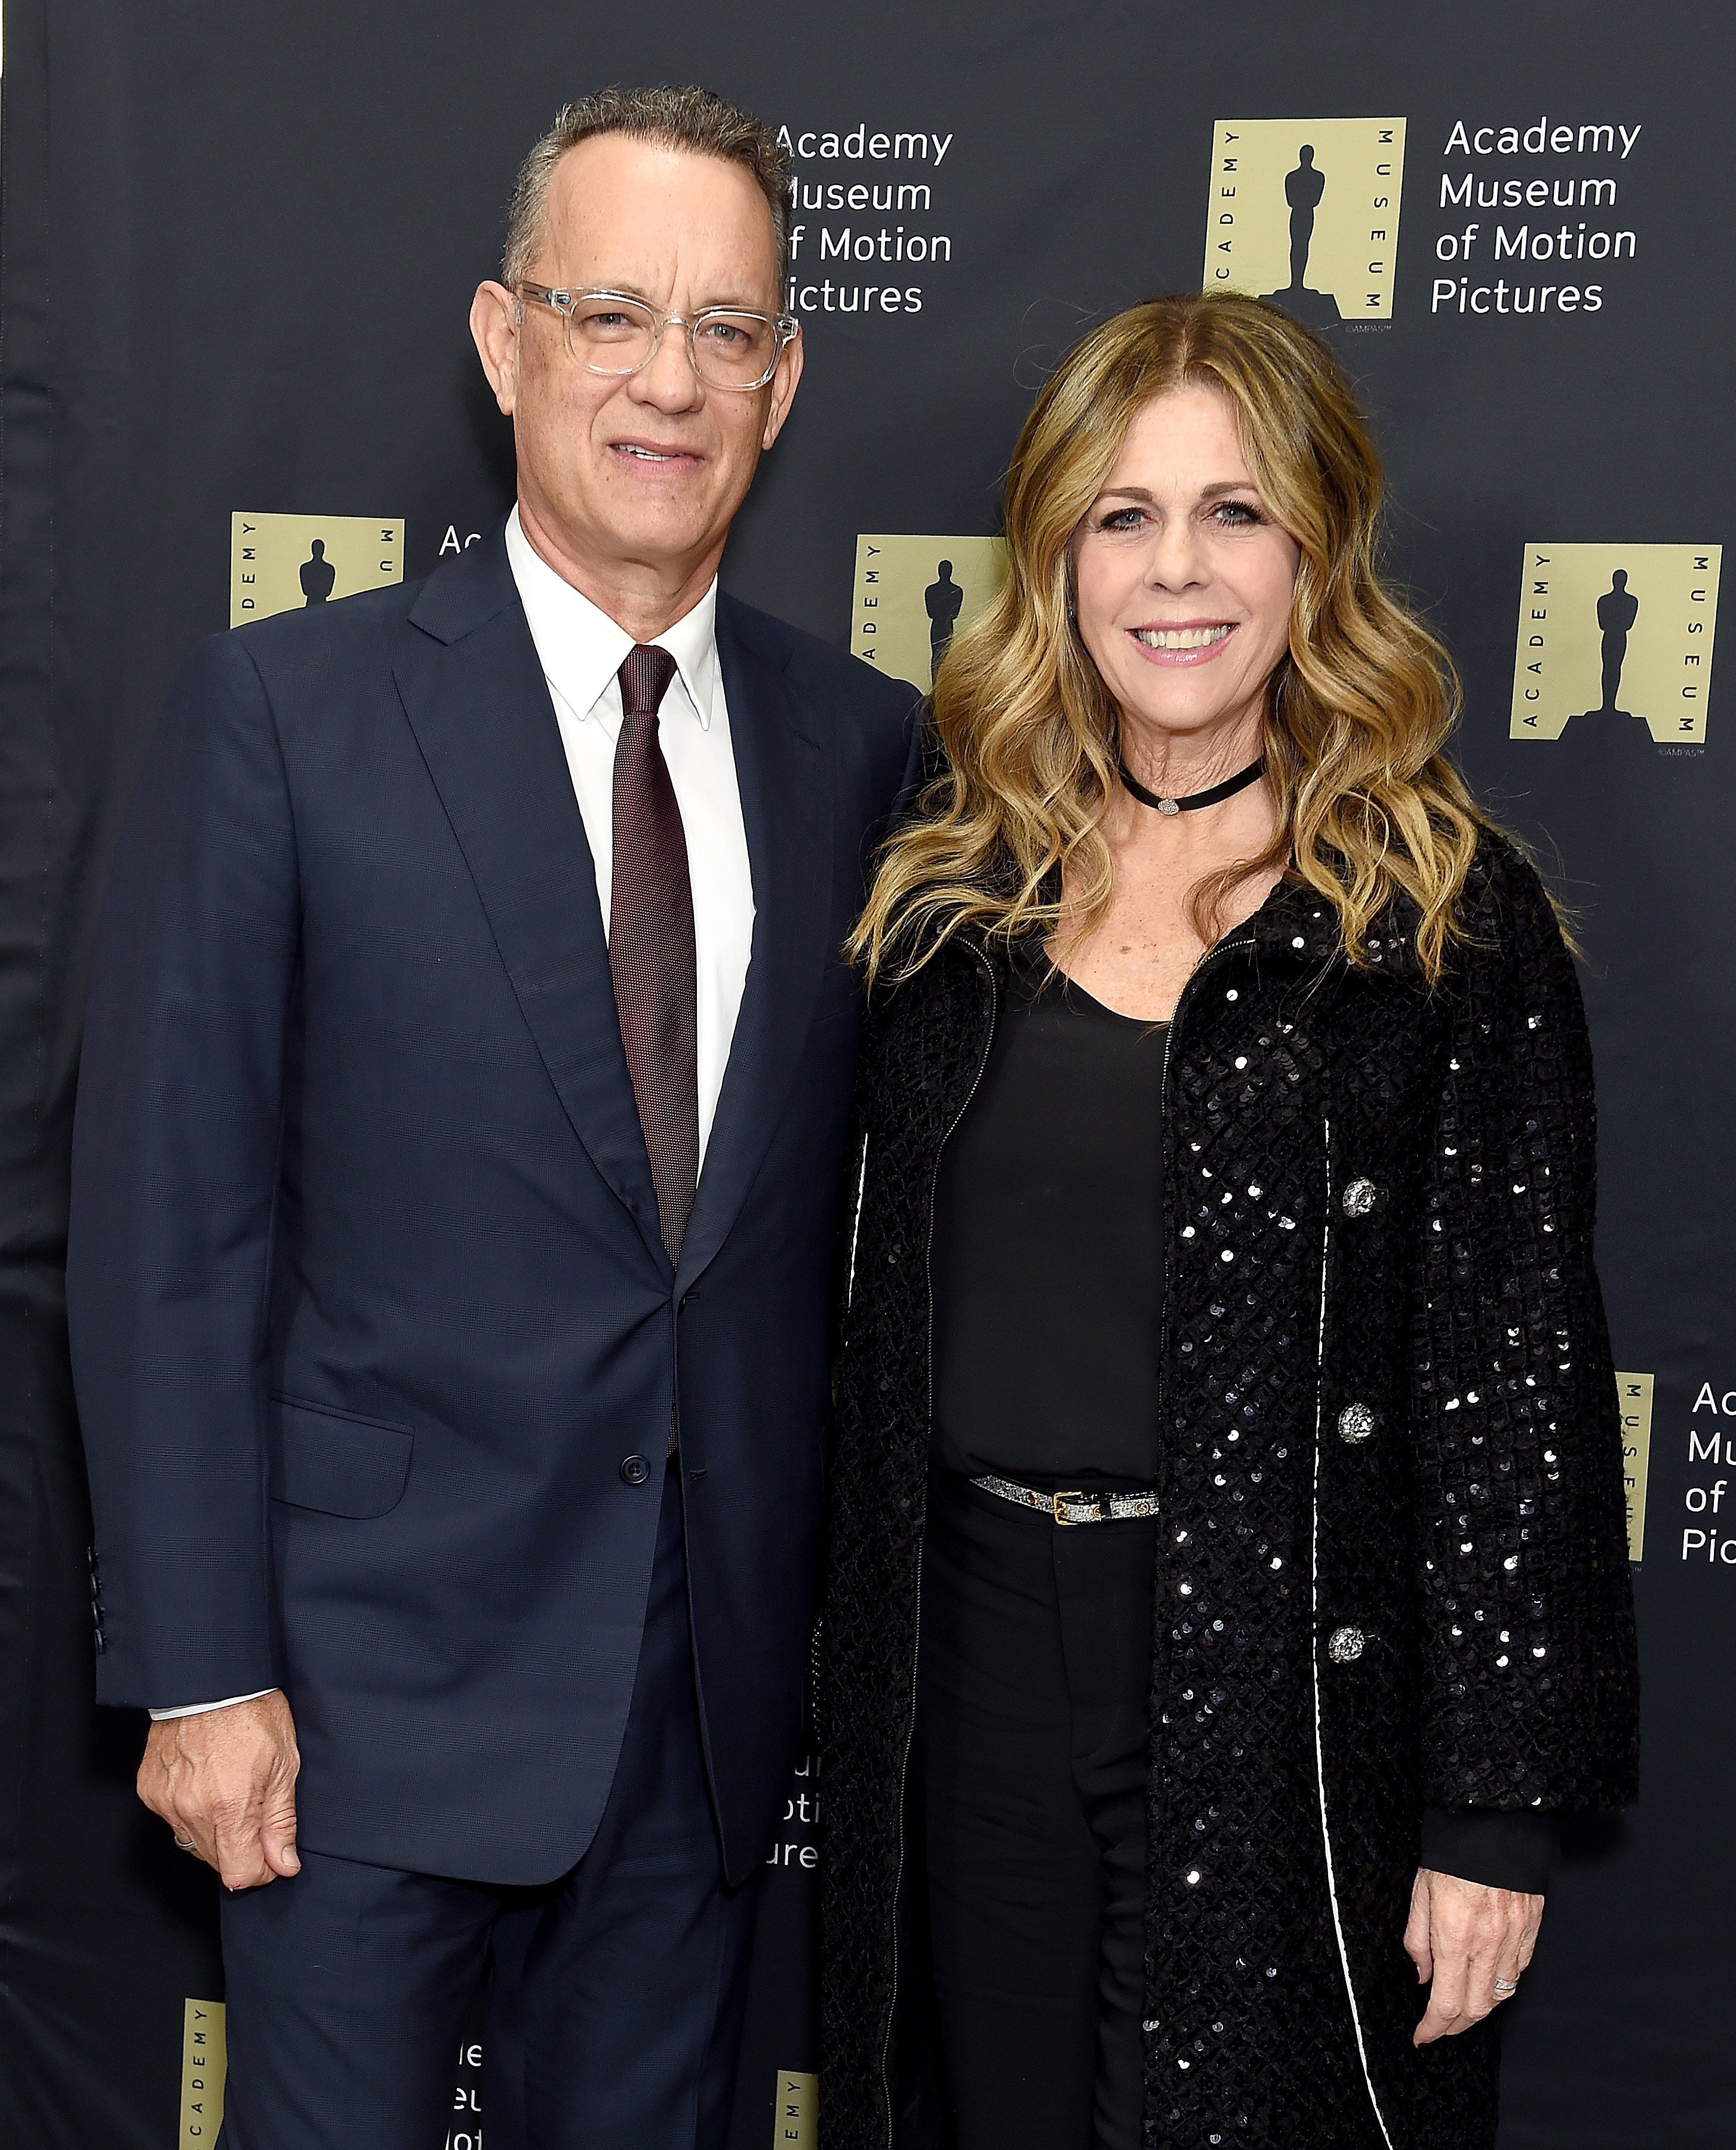 Tom Hanks and Rita Wilson attend the Unveiling of the Fully Restored Saban Building at Petersen Automotive Museum on December 4, 2018. | Photo: Getty Images